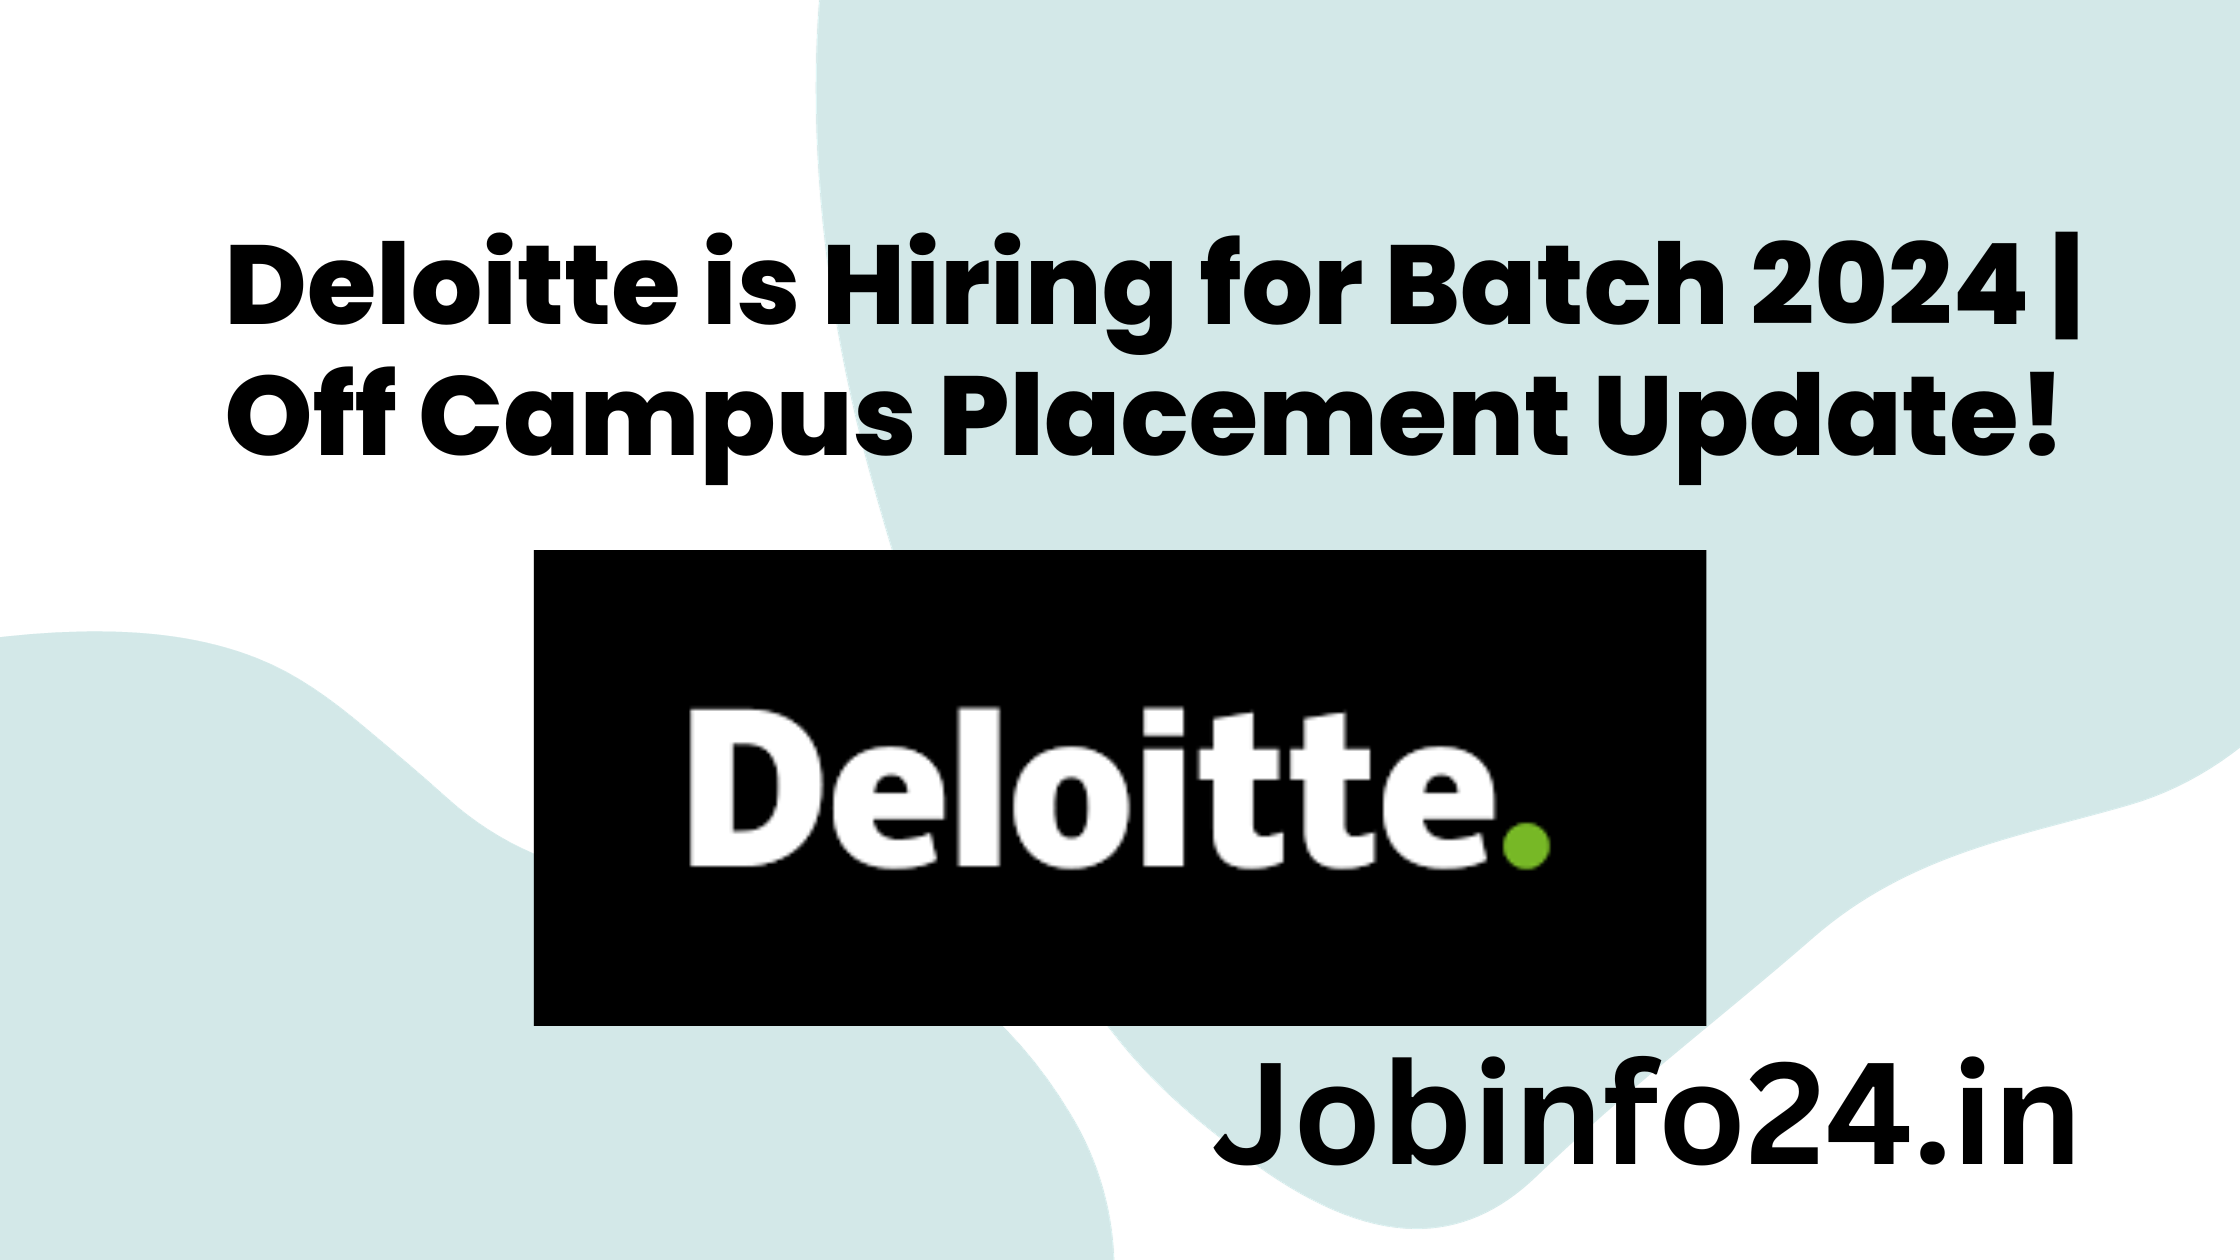 Deloitte Hiring for Batch 2024 and 2025